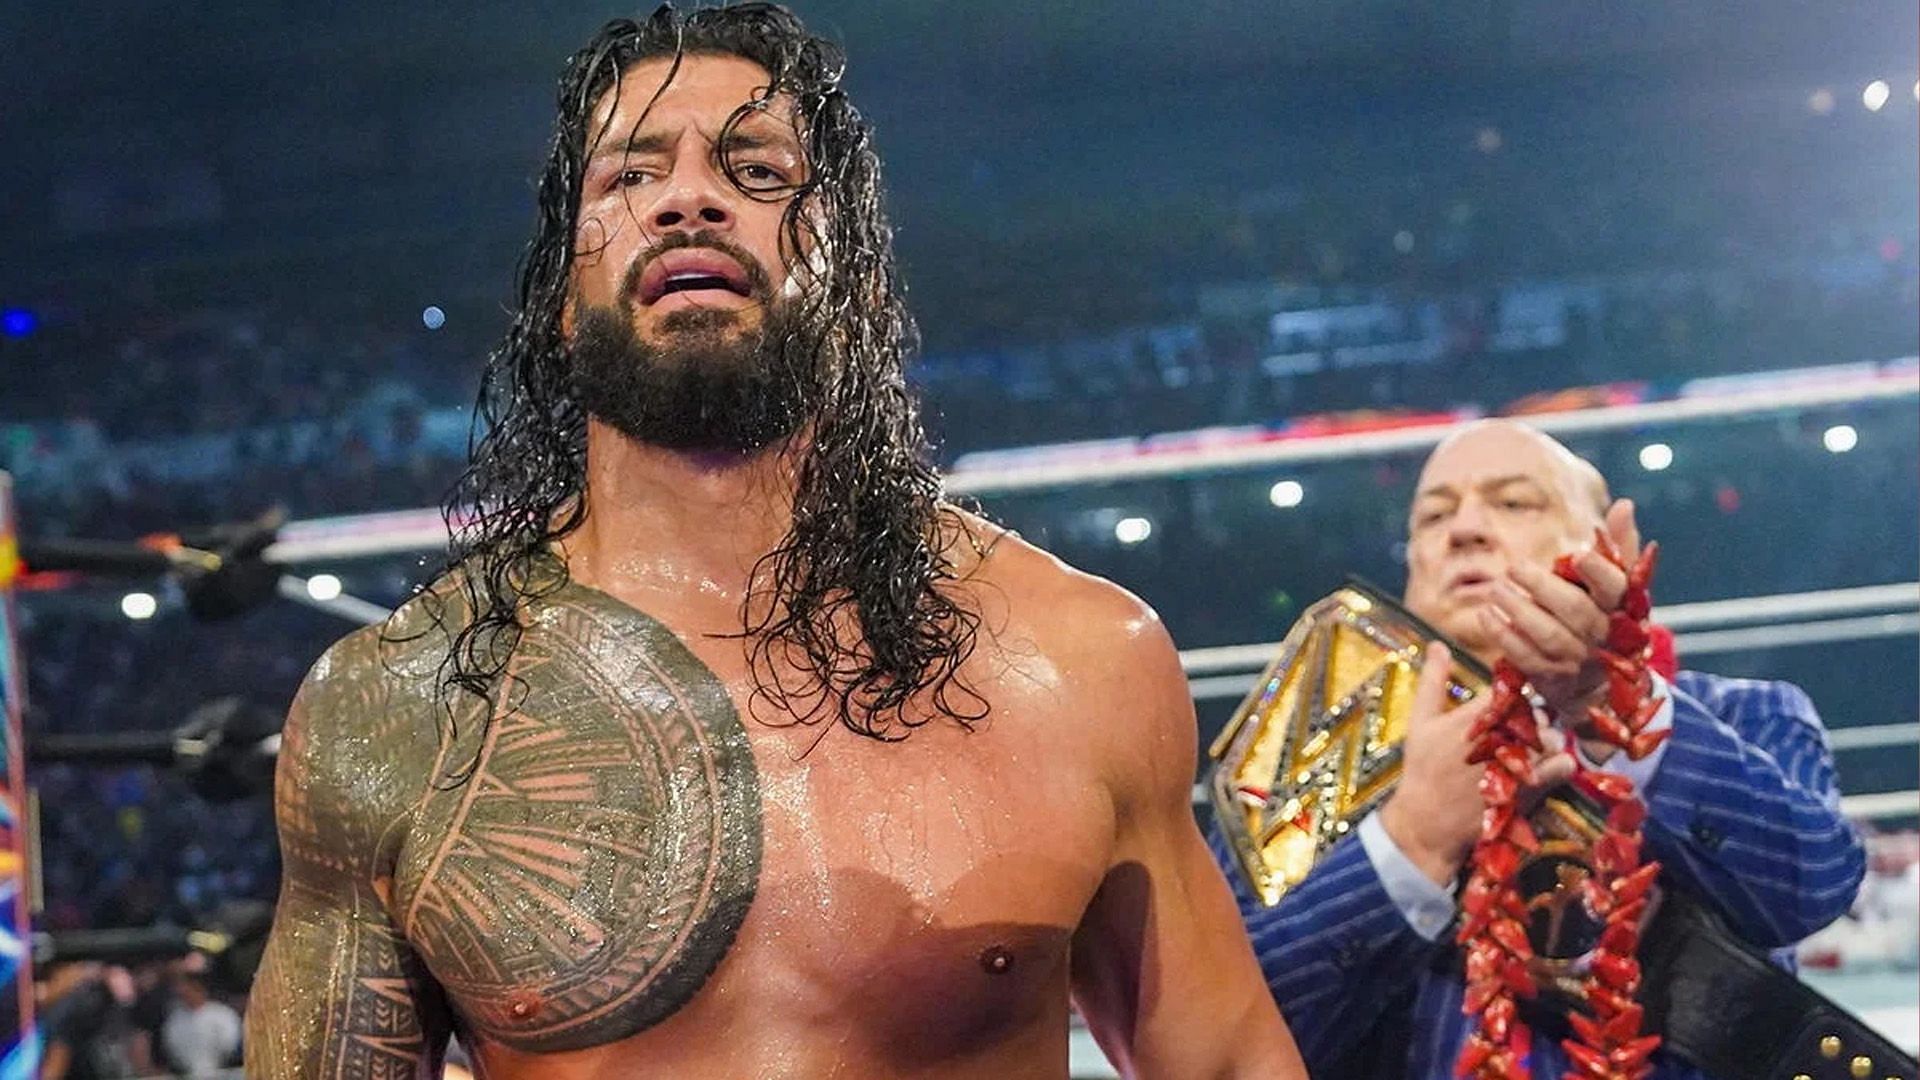 Roman Reigns is still the Undisputed WWE Universal Champion